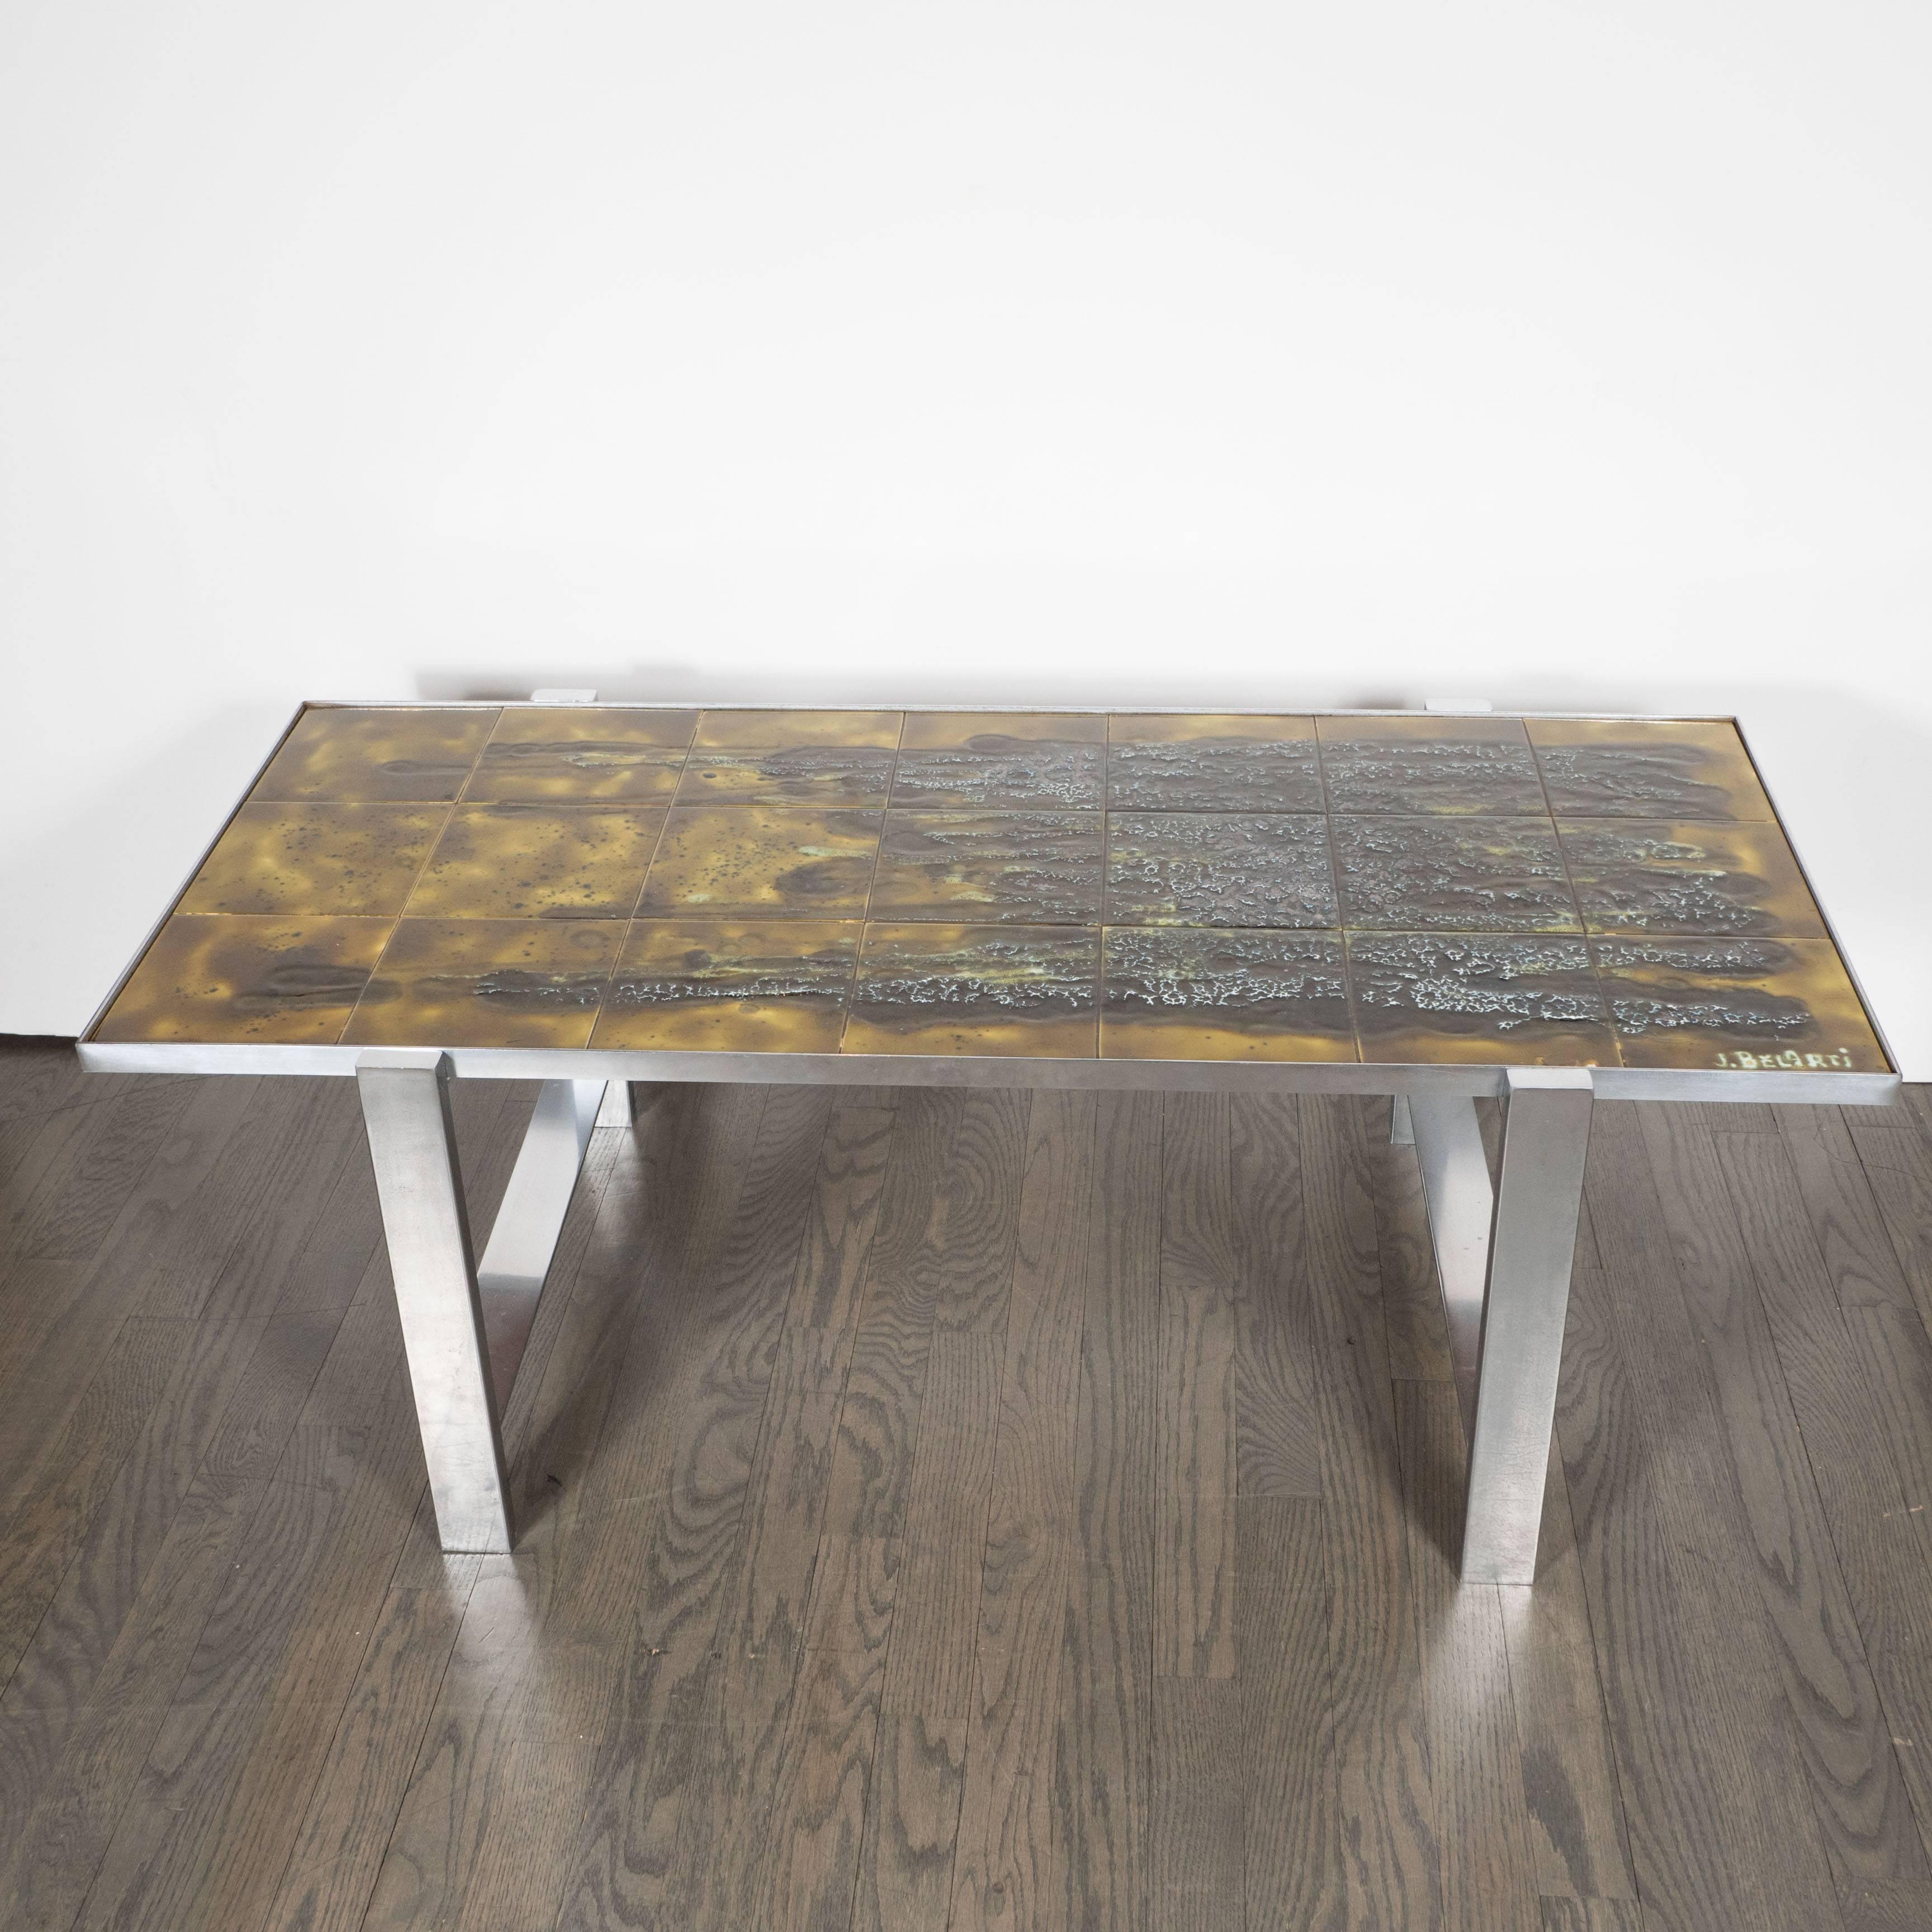 A stunning Mid-Century Modern ceramic tile and polished aluminium coffee table by Juliette Belarti, the tabletop with dark mossy green black brown handcrafted ceramic tiles signed 